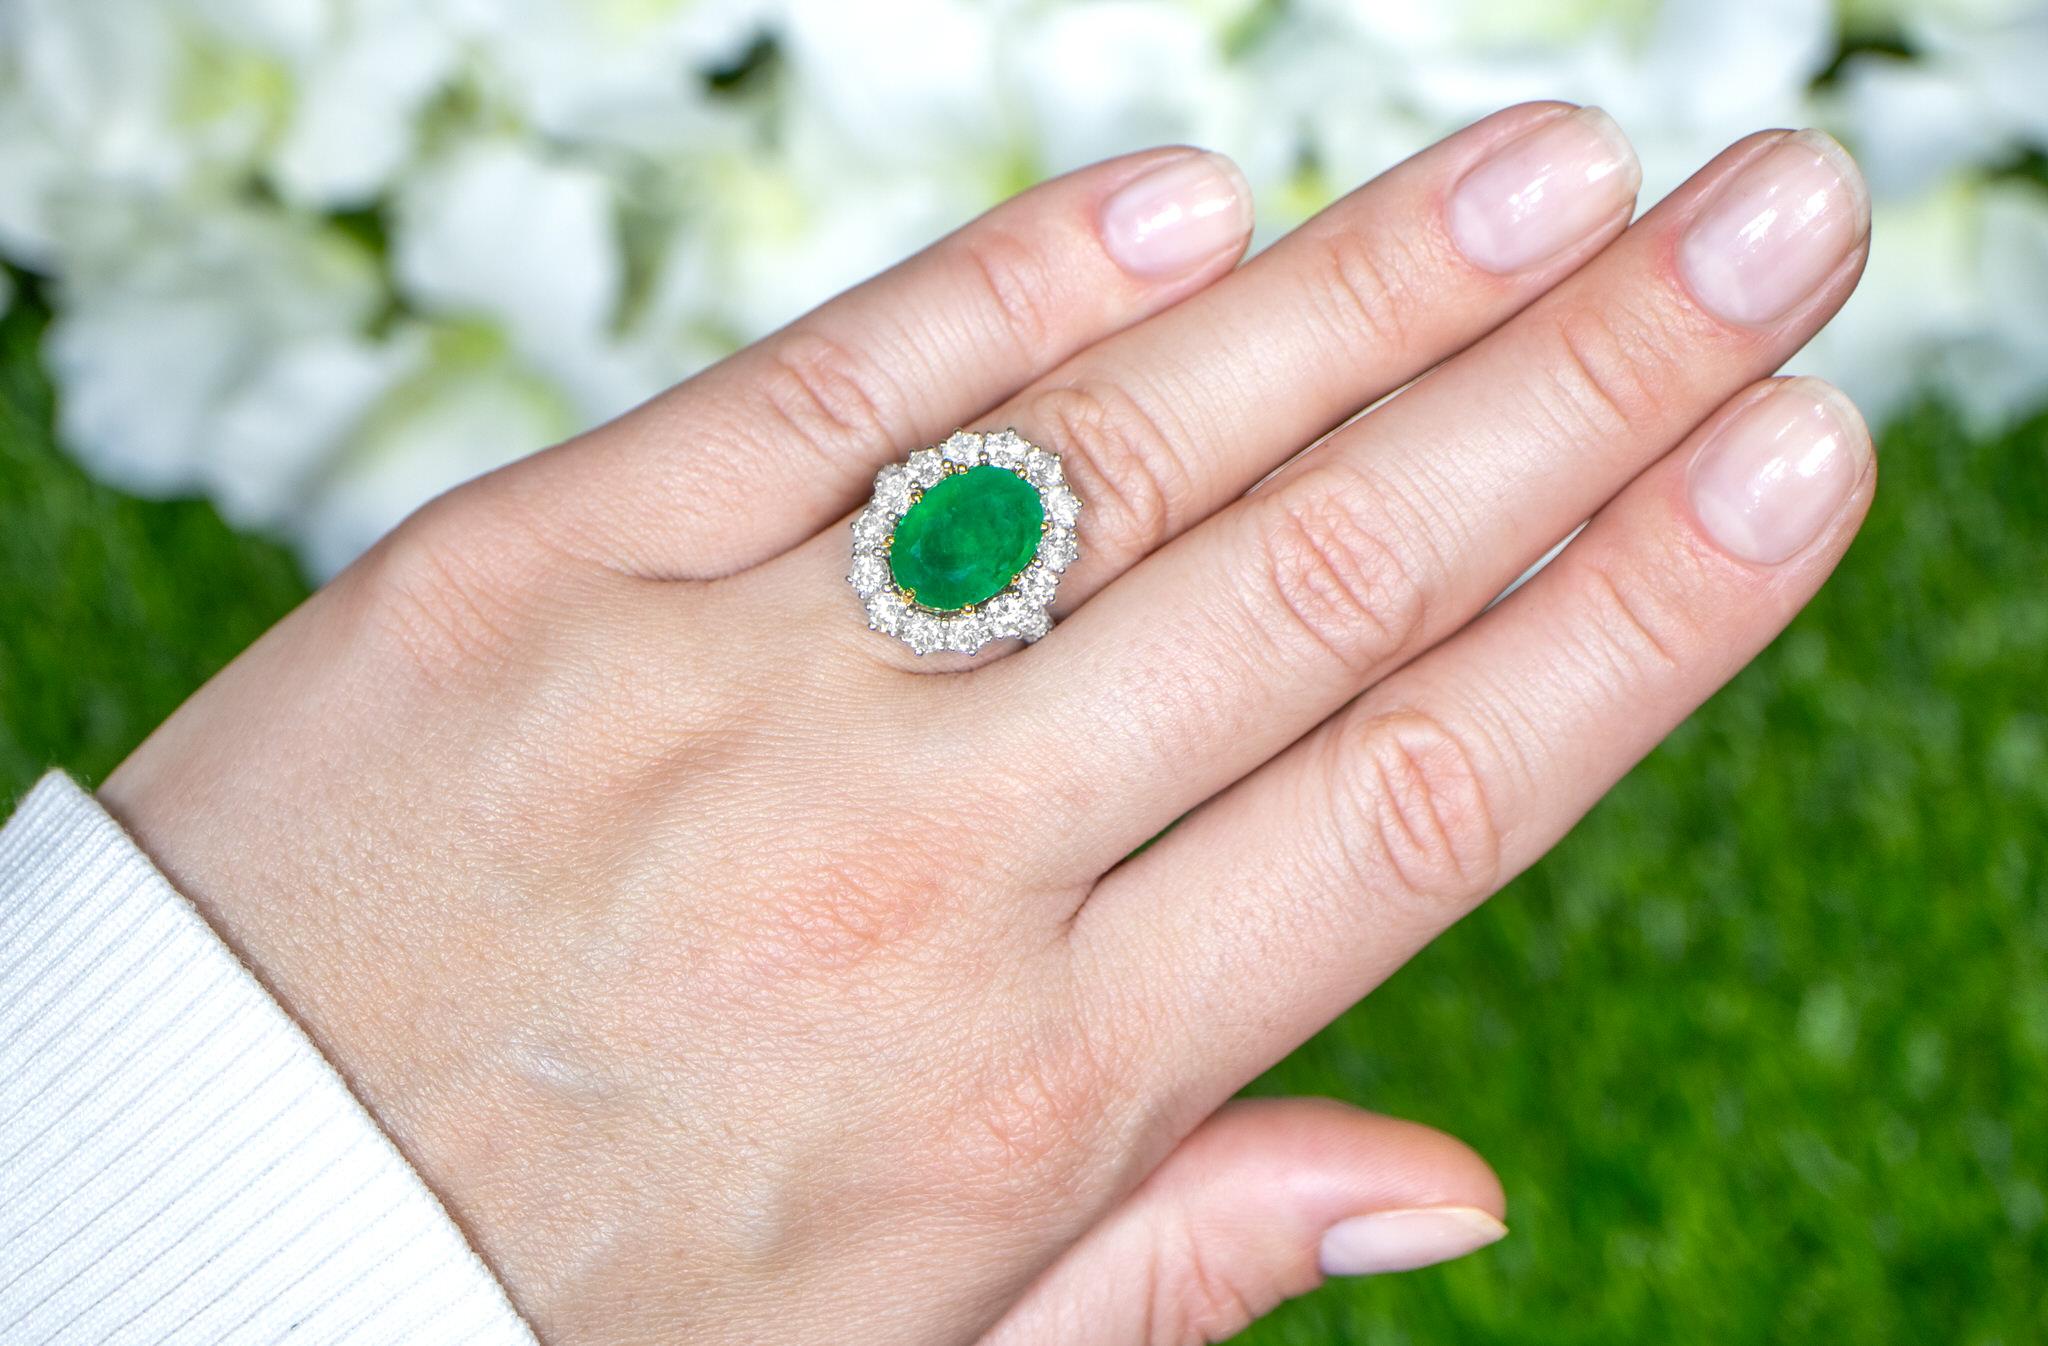 Oval Cut Oval Emerald Ring With Diamond Halo Setting 6.24 Carats 18K Gold For Sale